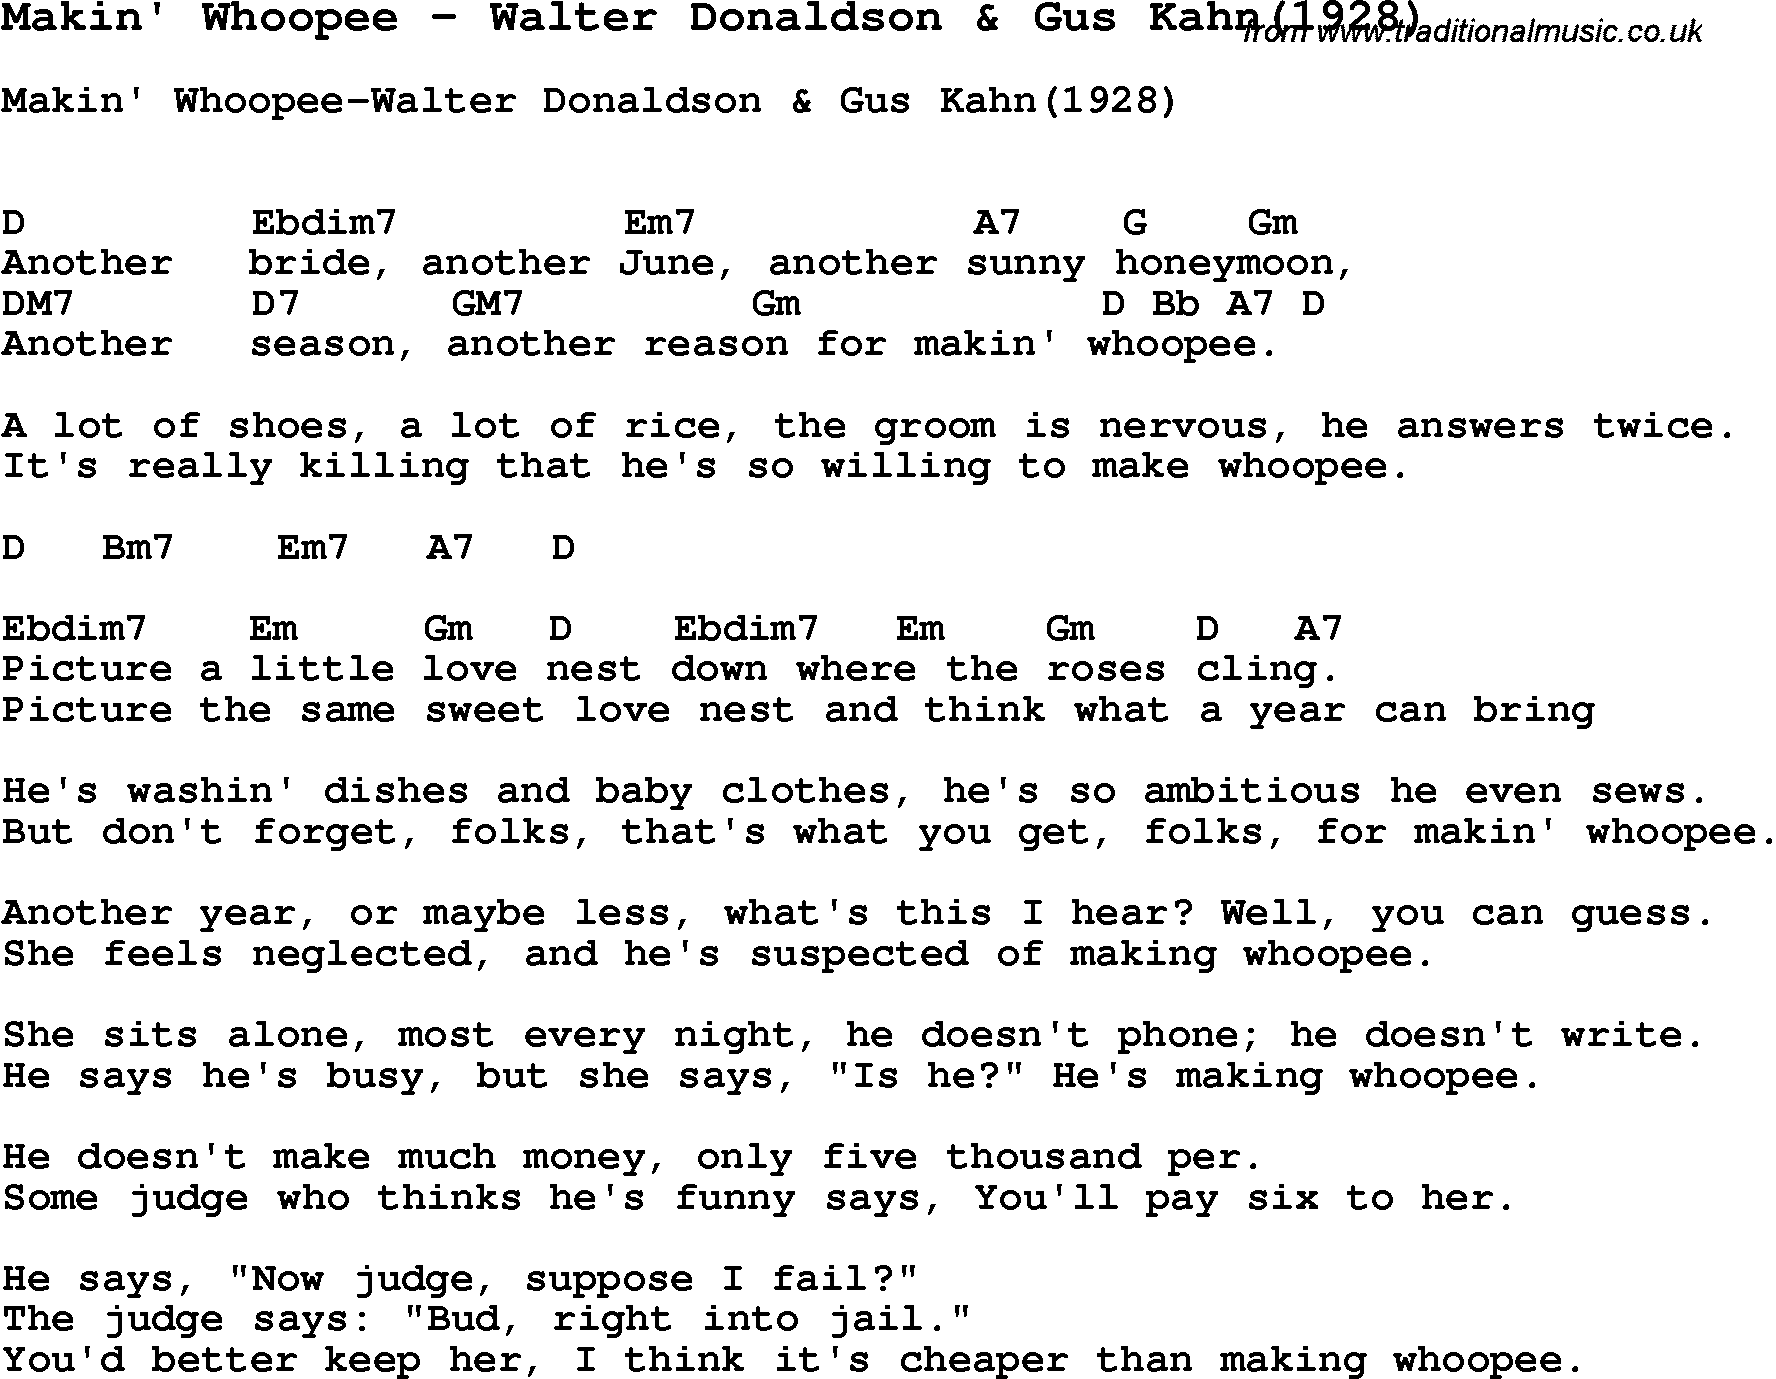 Song Makin' Whoopee by Walter Donaldson & Gus Kahn(1928), with lyrics for vocal performance and accompaniment chords for Ukulele, Guitar Banjo etc.